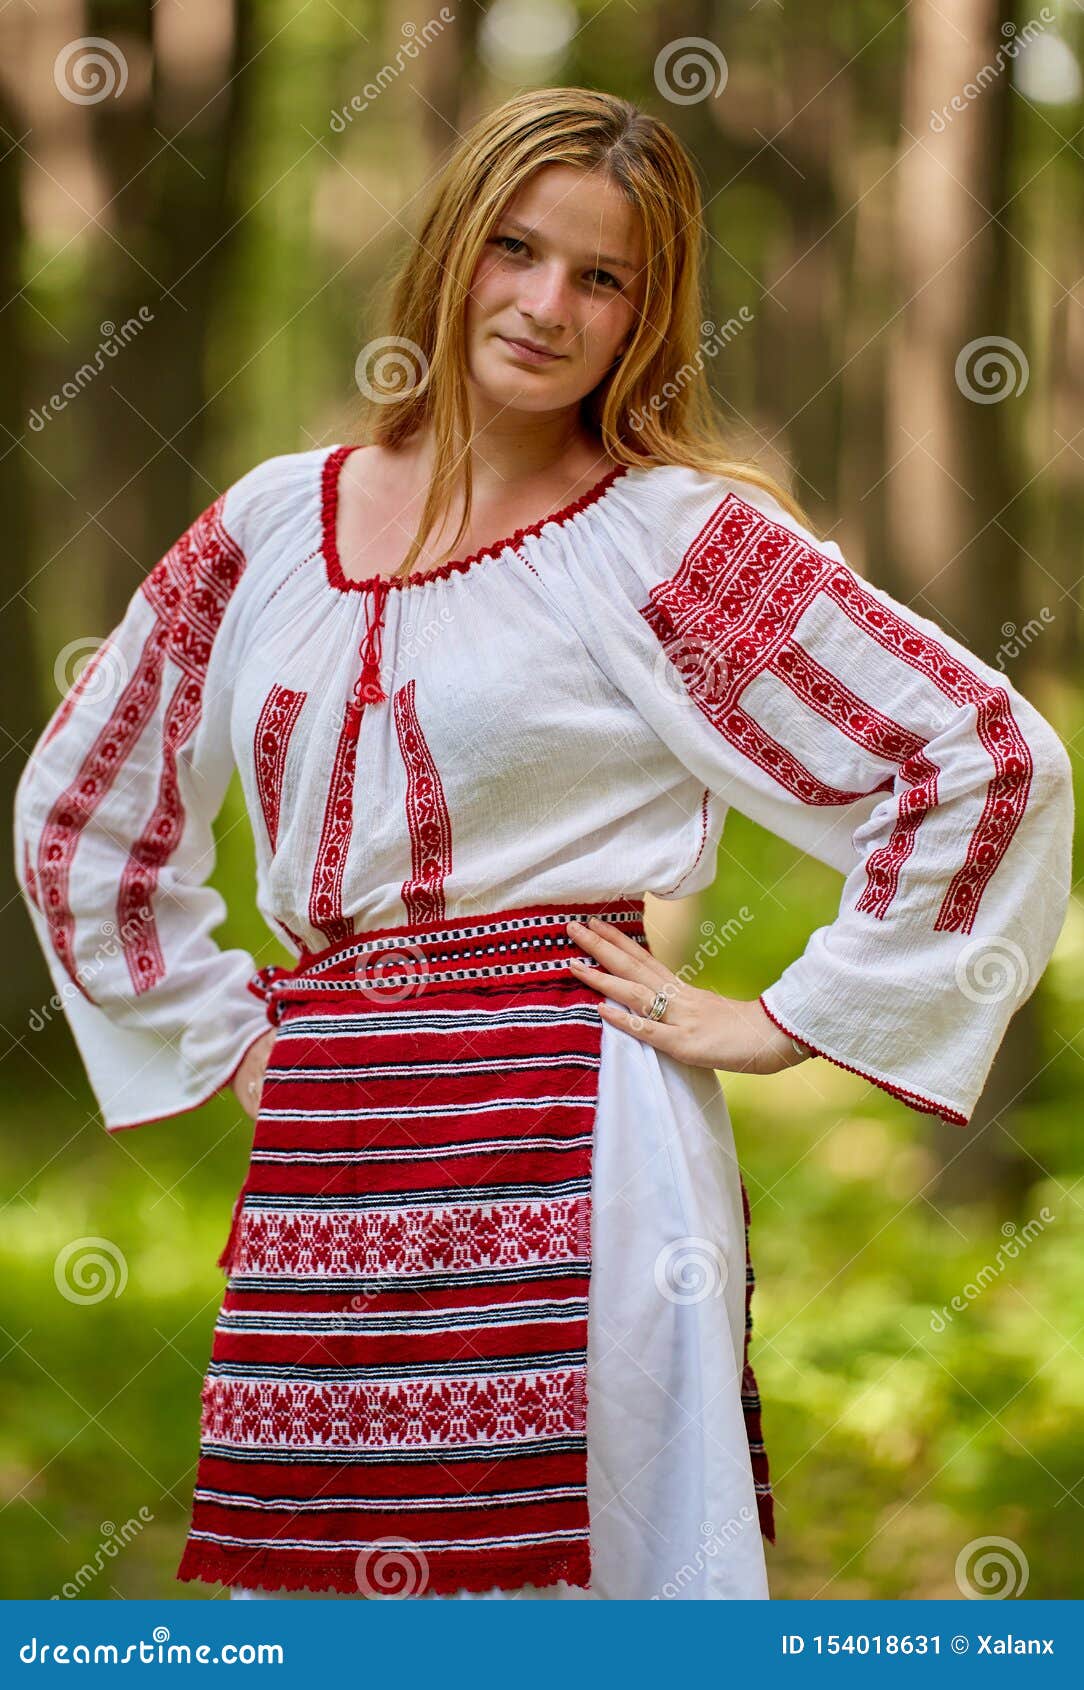 Girl in Traditional Romanian Costume Stock Image - Image of national ...